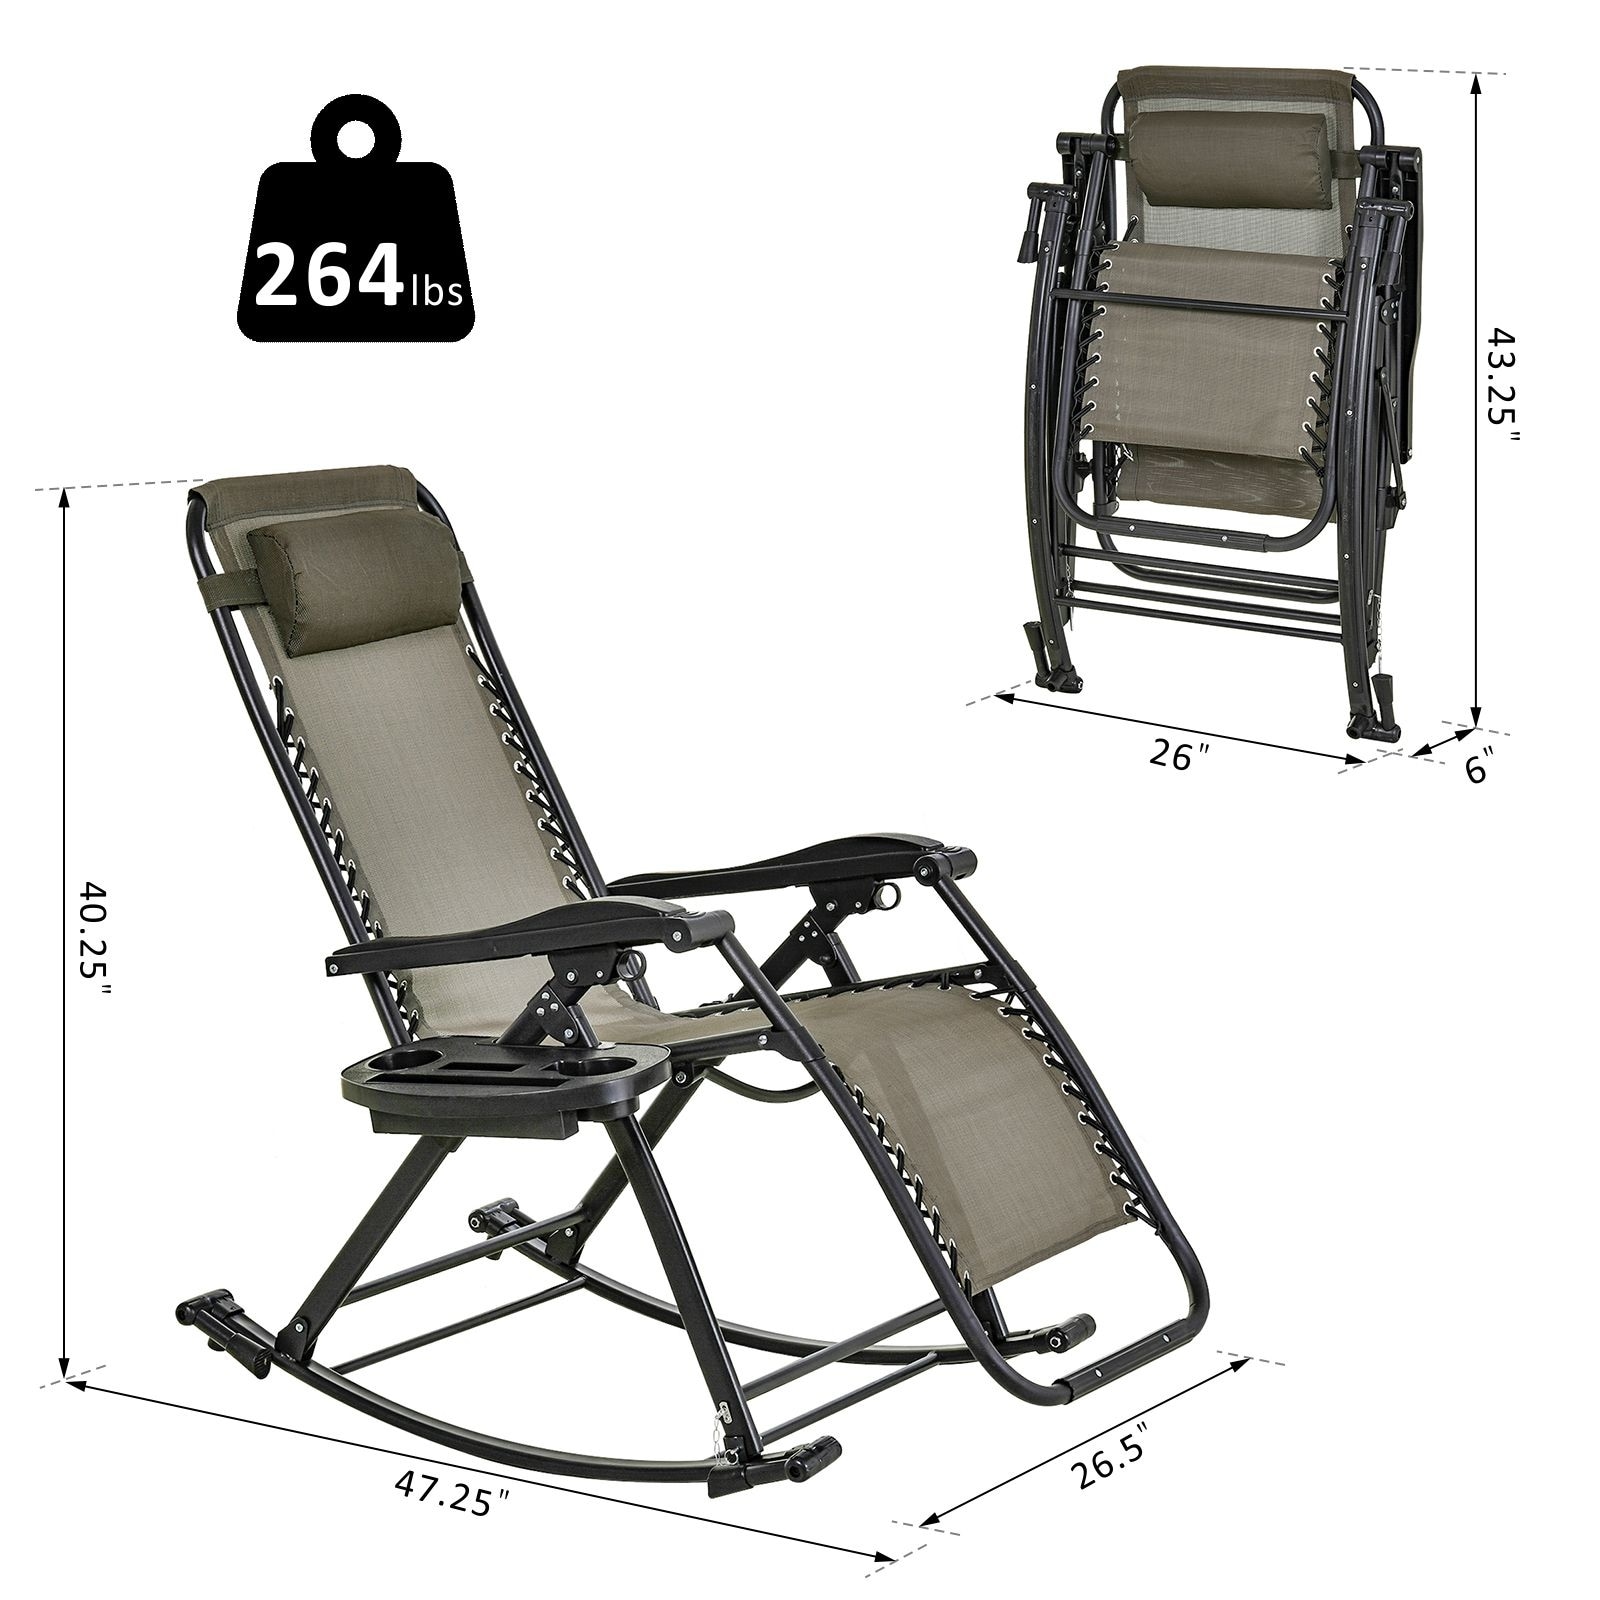 Adjustable Rocking Chairs Sun Lounger Chairs & Recliners Outdoor Folding Rocker 